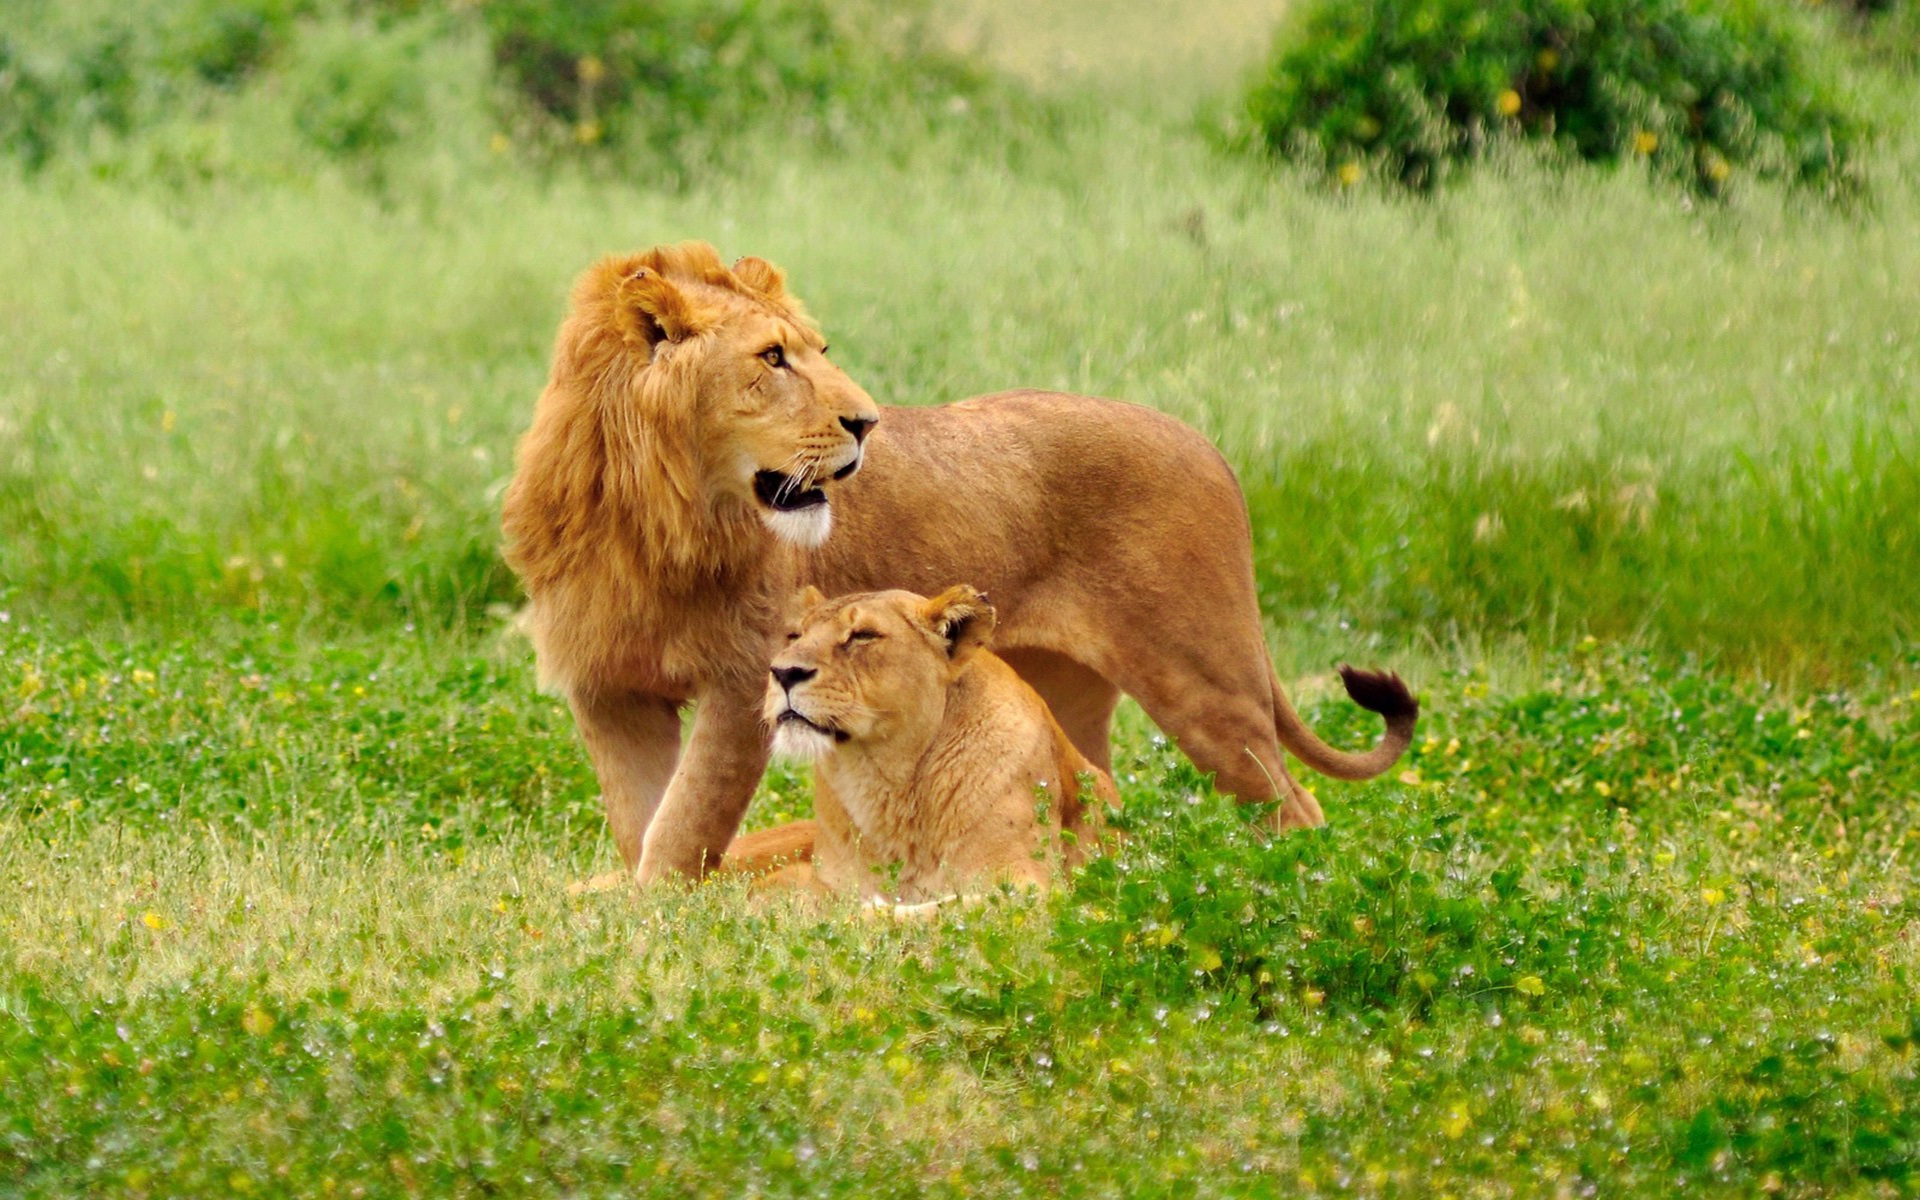 Lion and Lioness in forest wild animal wallpapers | Beautiful hd ...